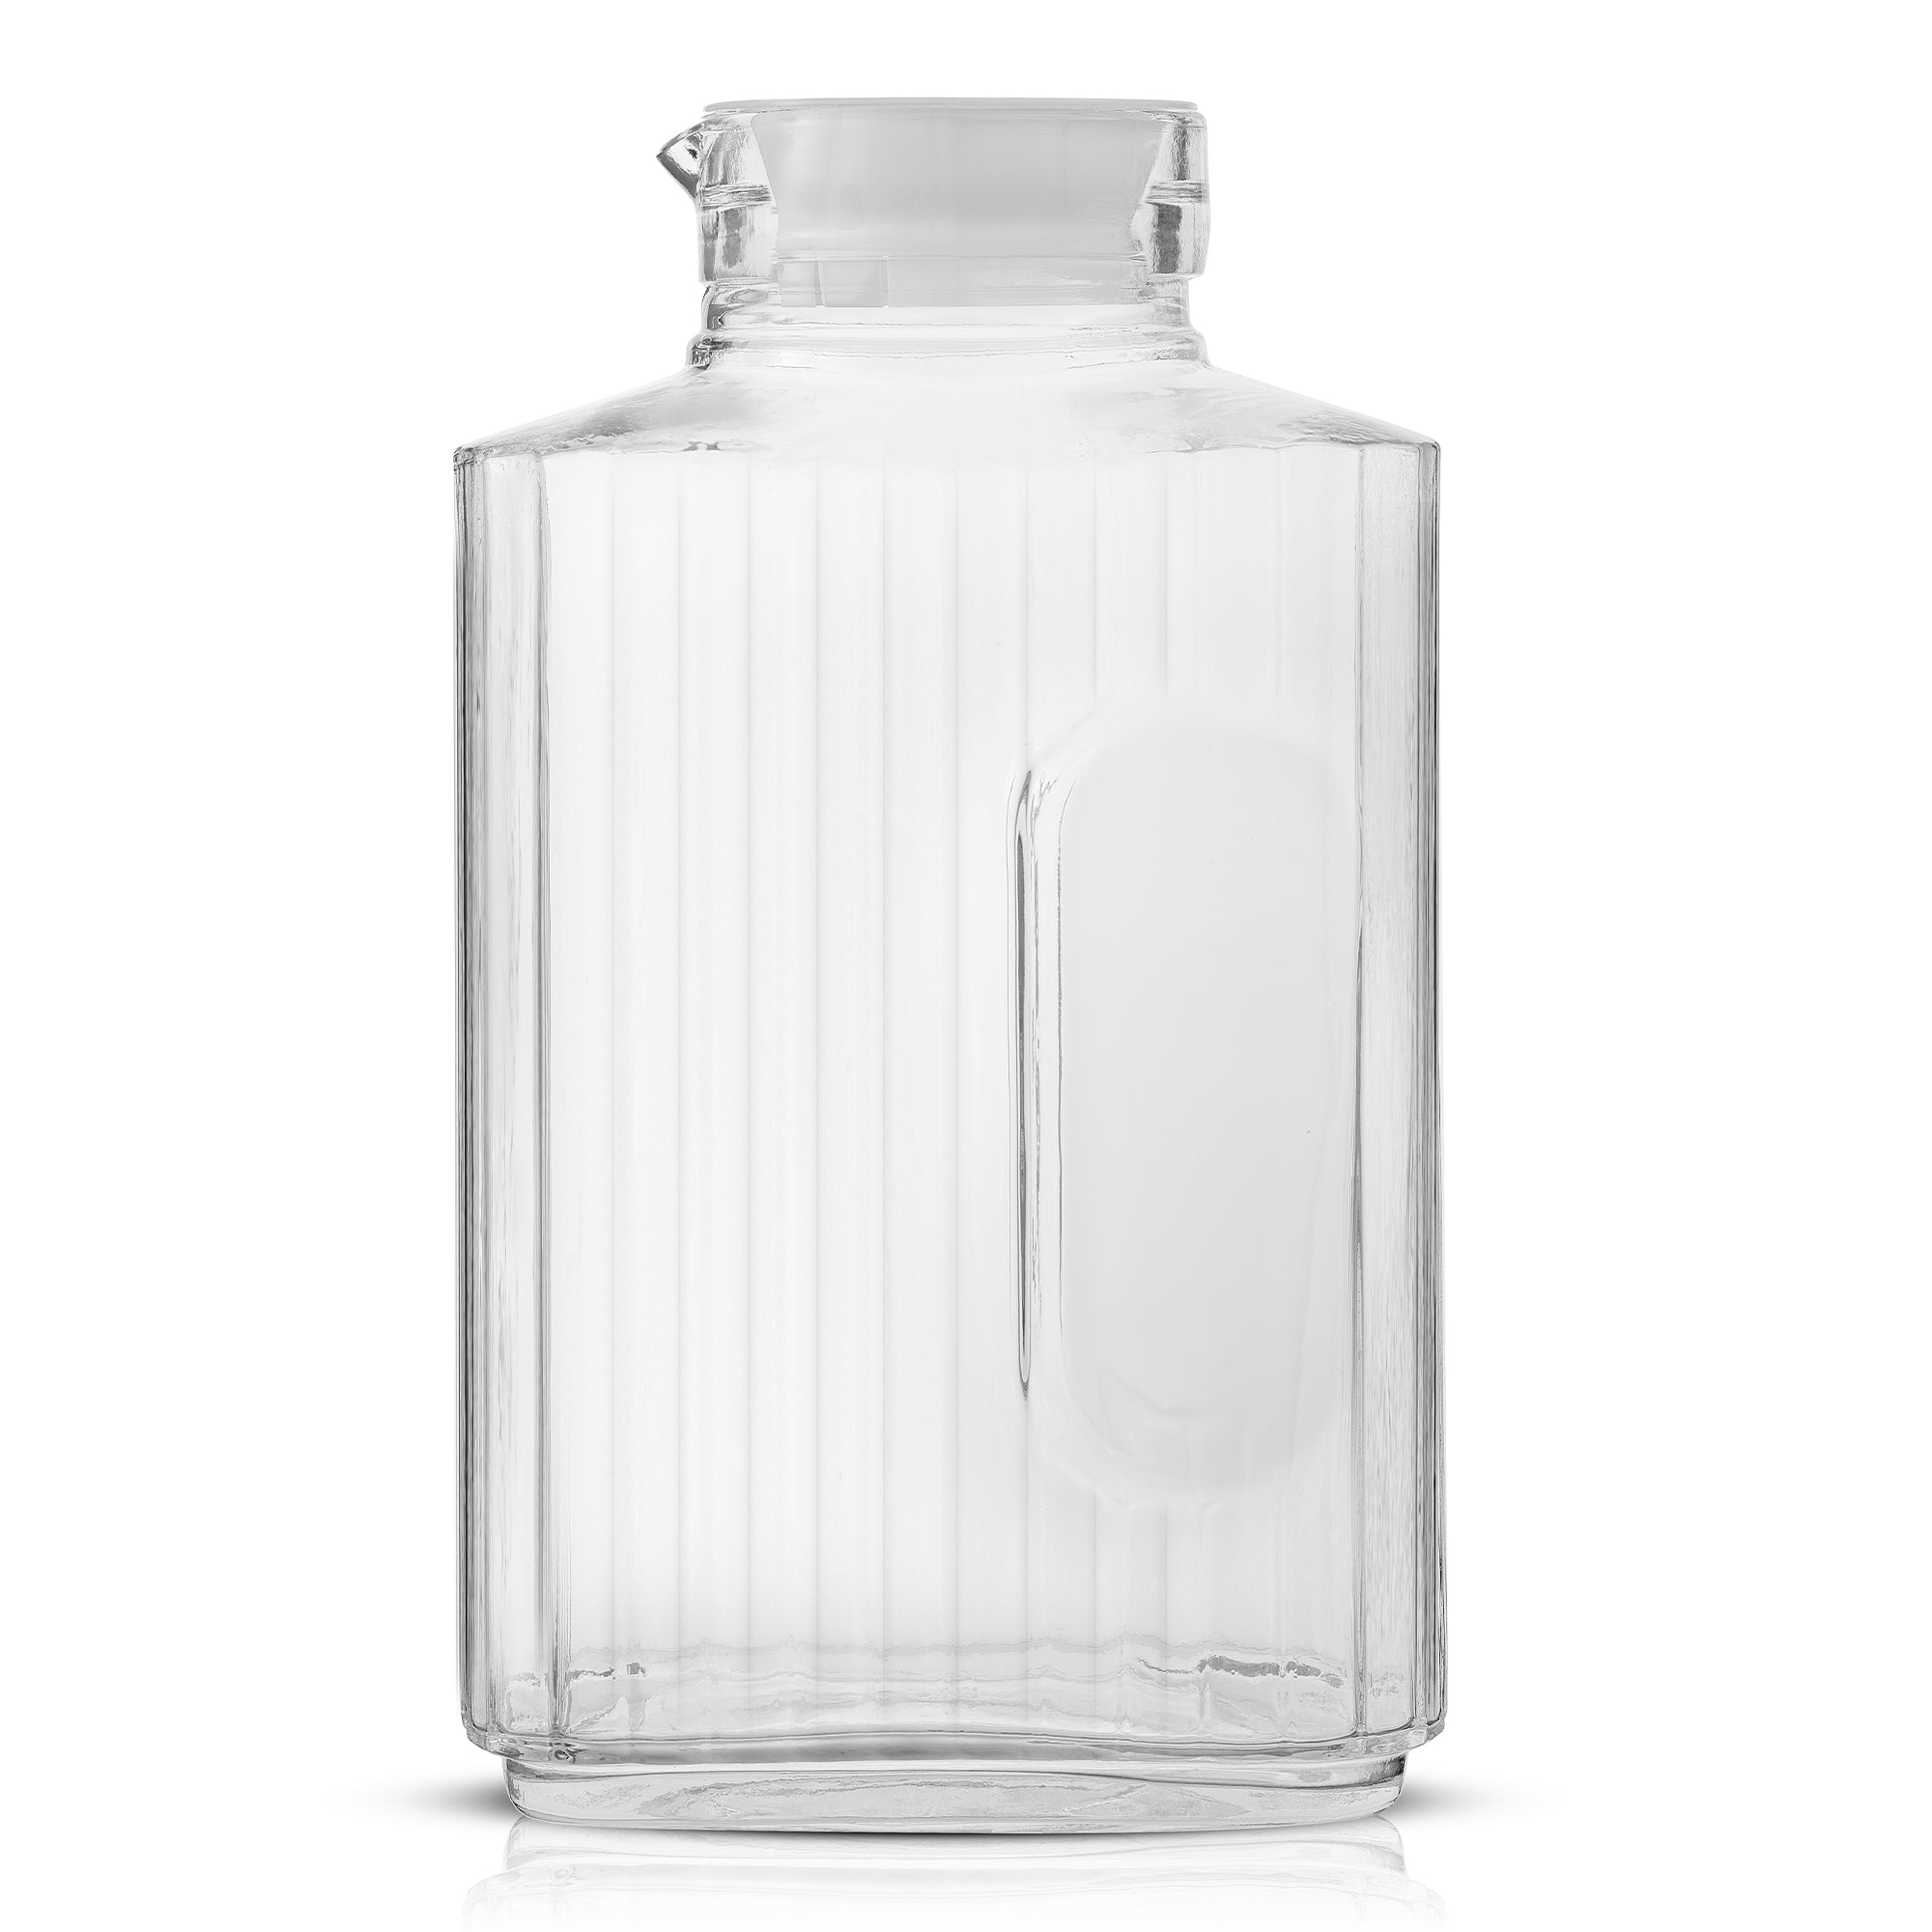 A clear glass JoyJolt Beverage Serveware Glass Pitcher with a white lid sits on a white background. The pitcher is empty.